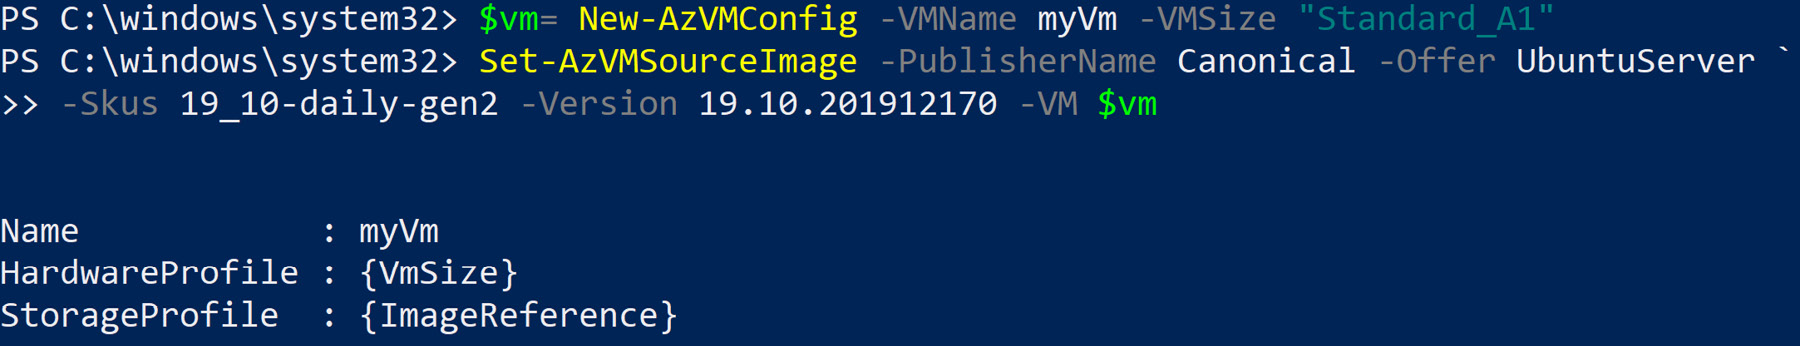 Creating a new virtual machine with a size of Standard_A1 by instructing Powershell to use image version